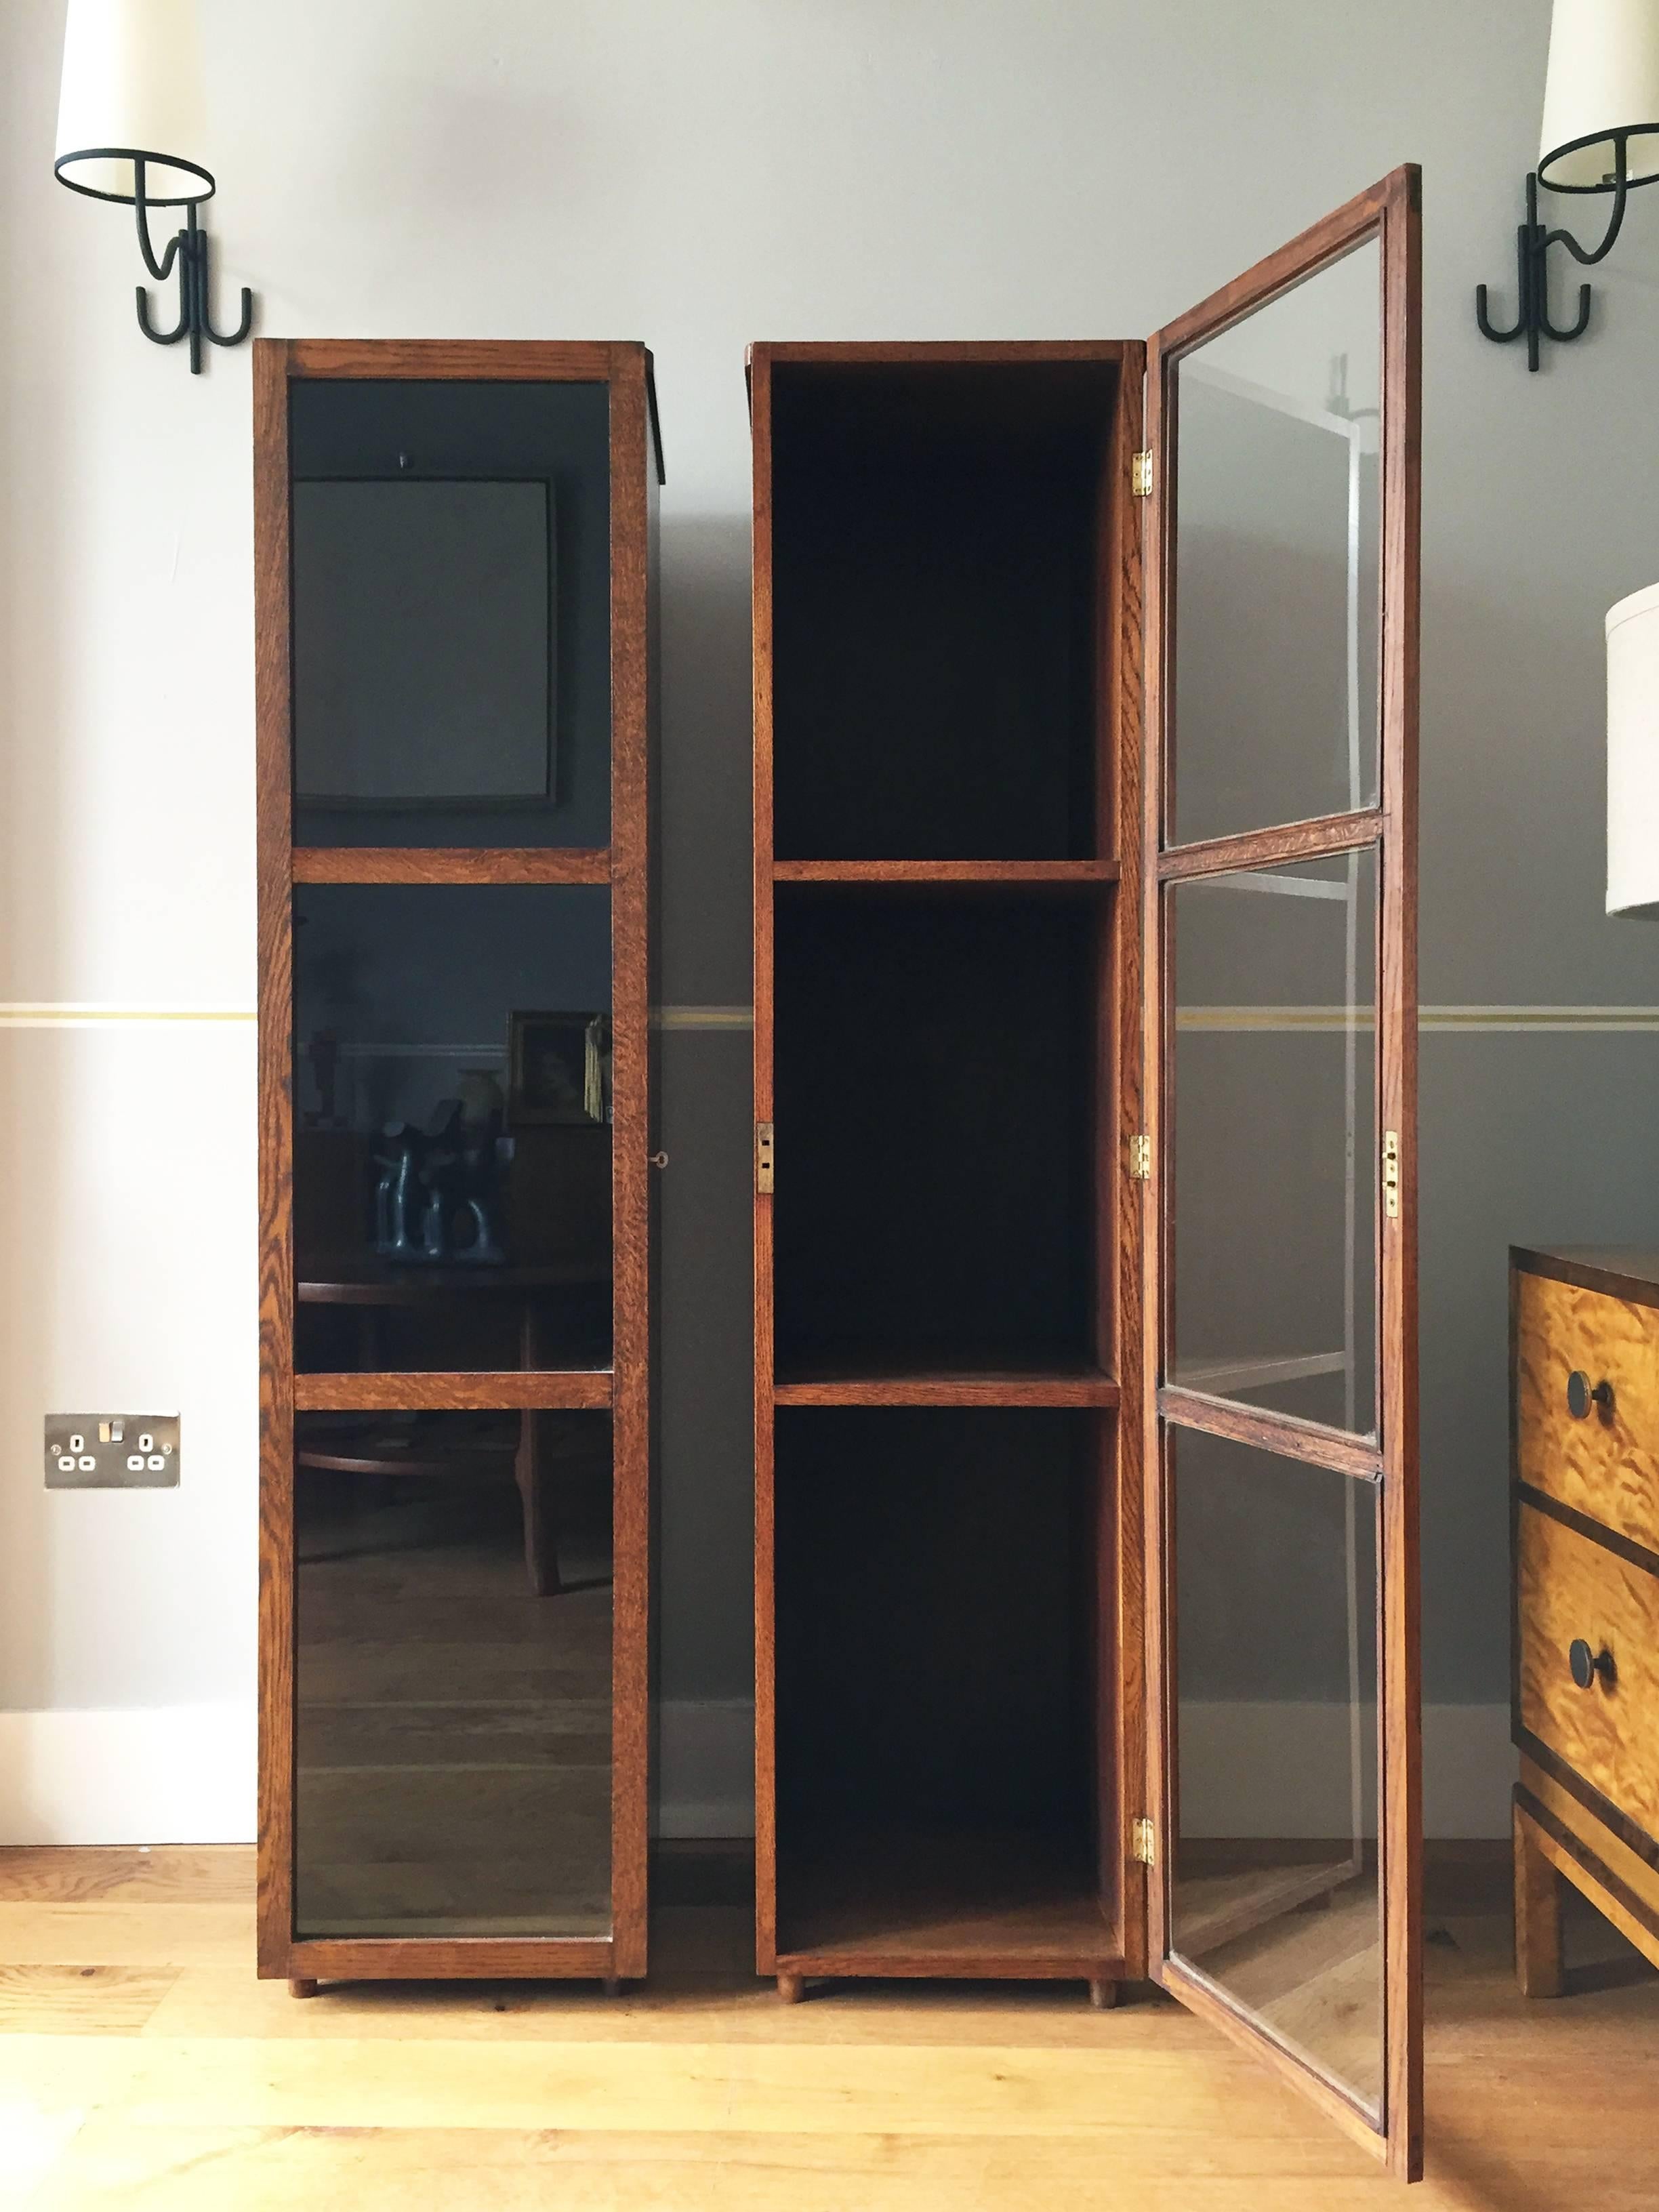 An unusual pair of oak narrow bookcases or display cabinets, divided in three compartments with shelves, closing symmetrically with glazed doors,
English, circa 1940.
Measures: 150.5 cm high by 36.5 cm wide by 35.5 cm deep.